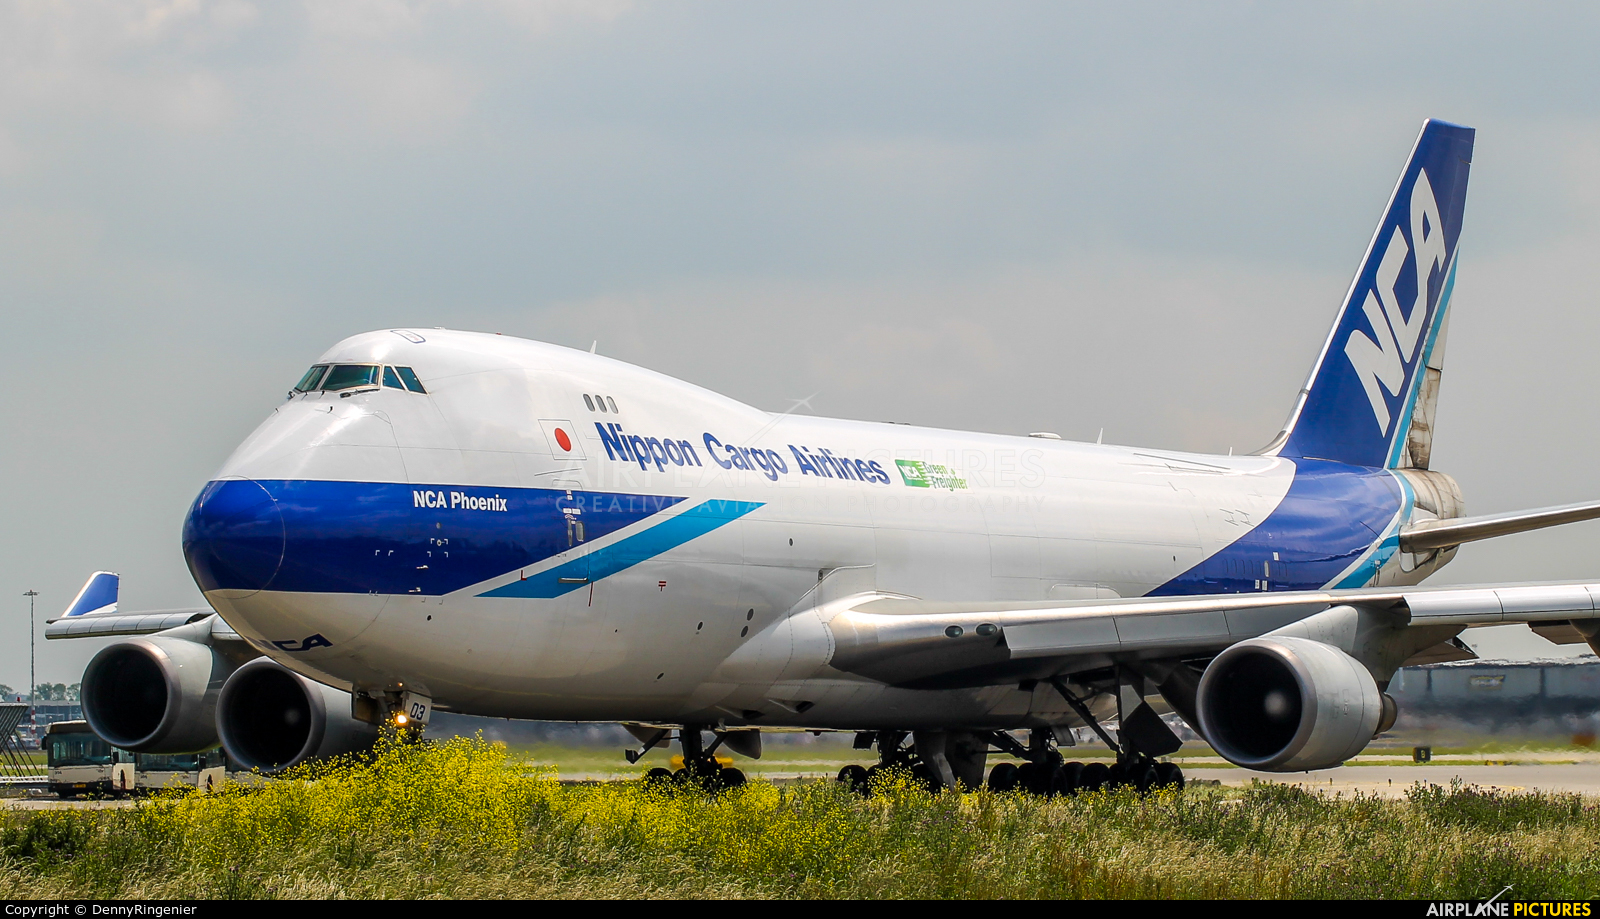 Nippon Cargo Airlines JA03KZ aircraft at Amsterdam - Schiphol